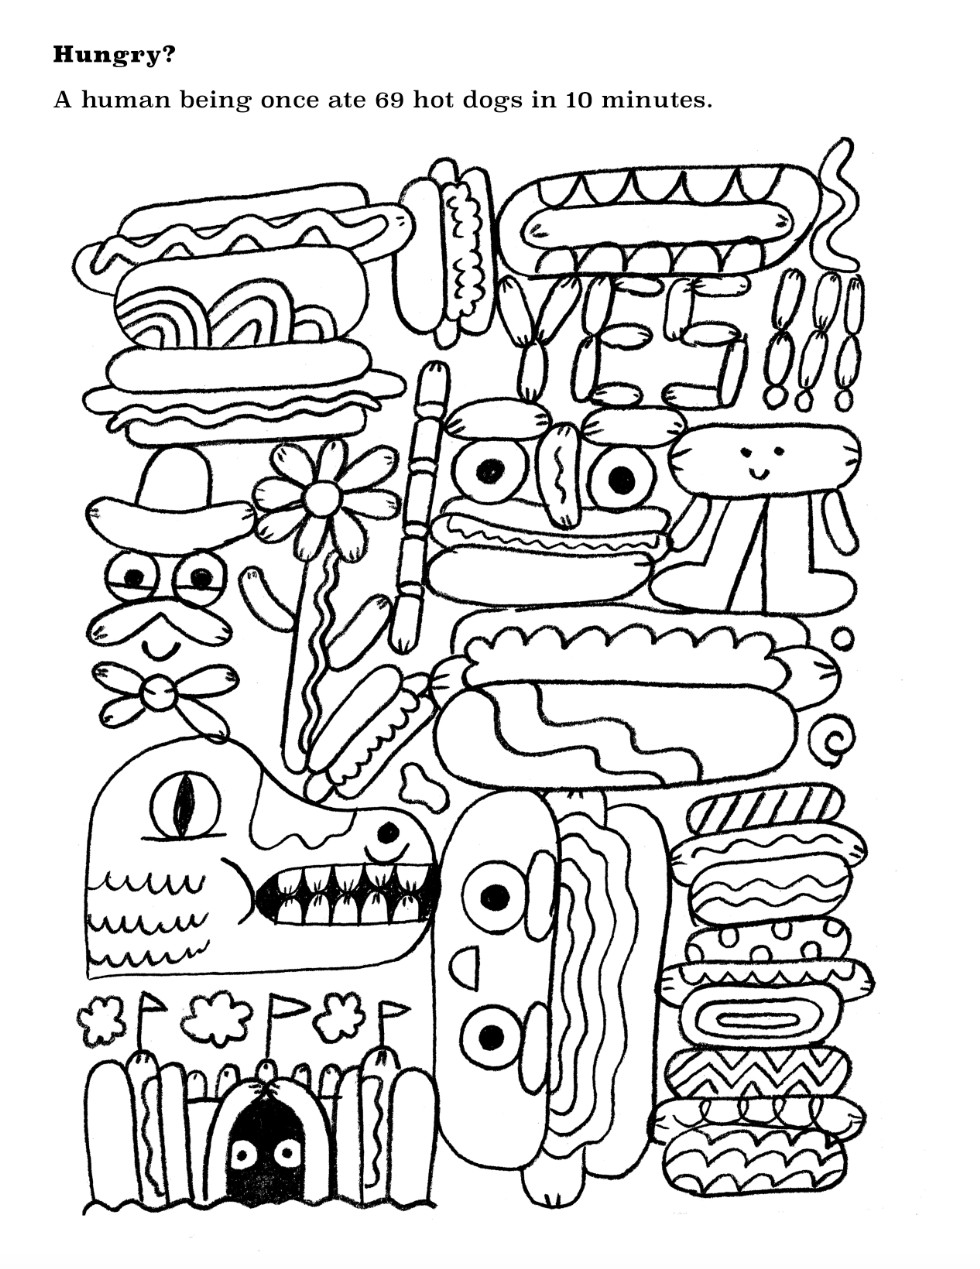 Weird Coloring Pages For Adults
 Limited Weird Design Coloring Pages Pattern The Sun Flower